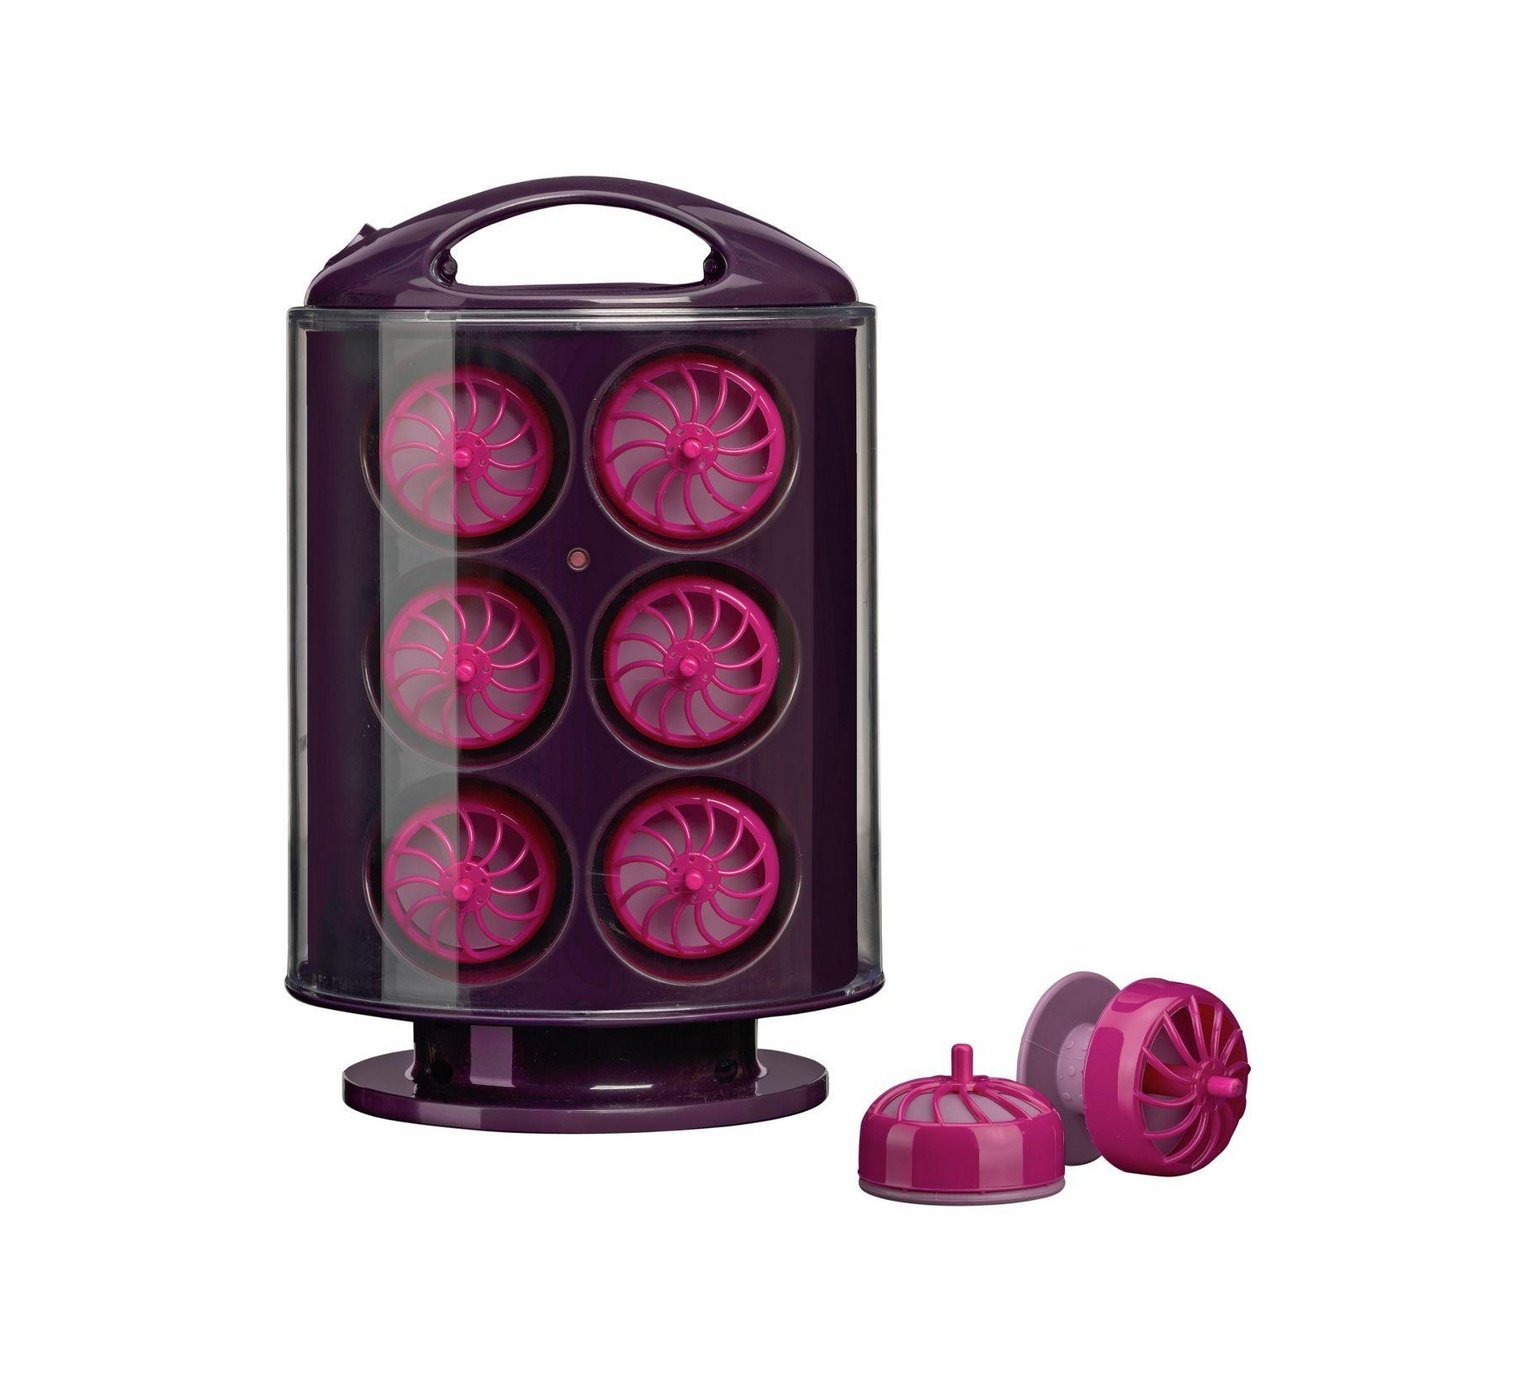 BaByliss 3663U Curl Pods Hair Heated Rollers